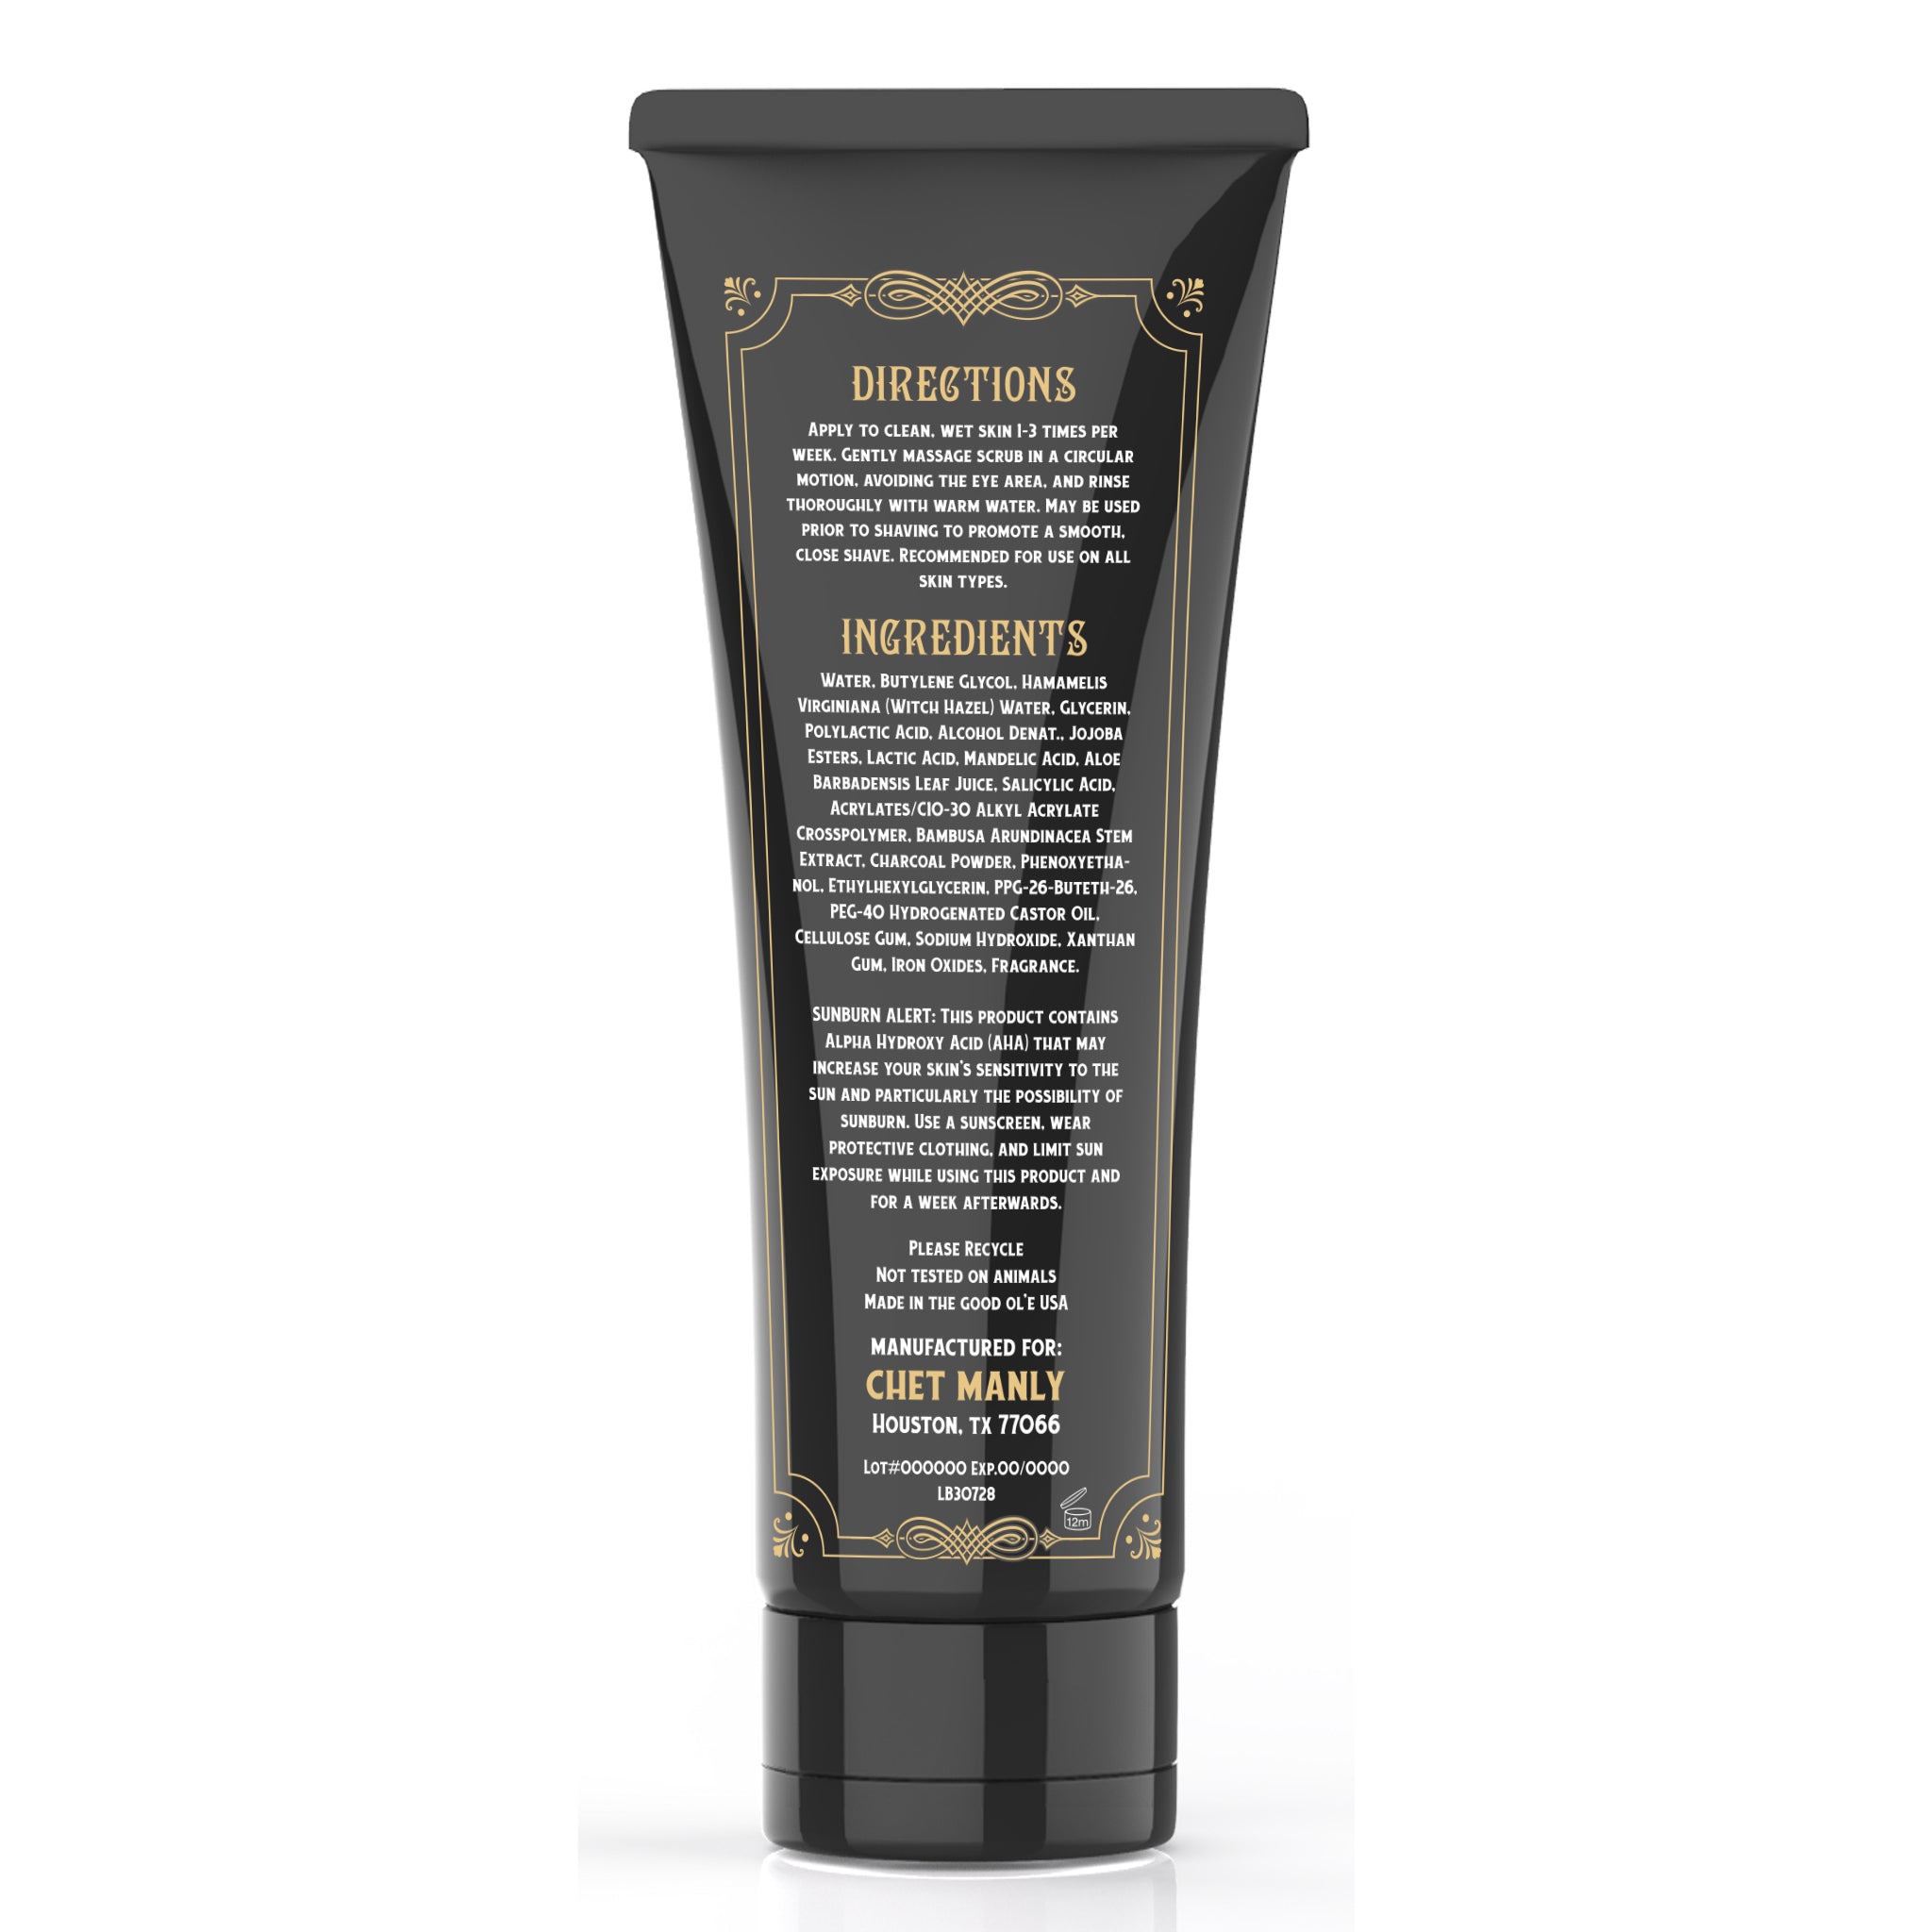 Manly Excelsior Exfoliant